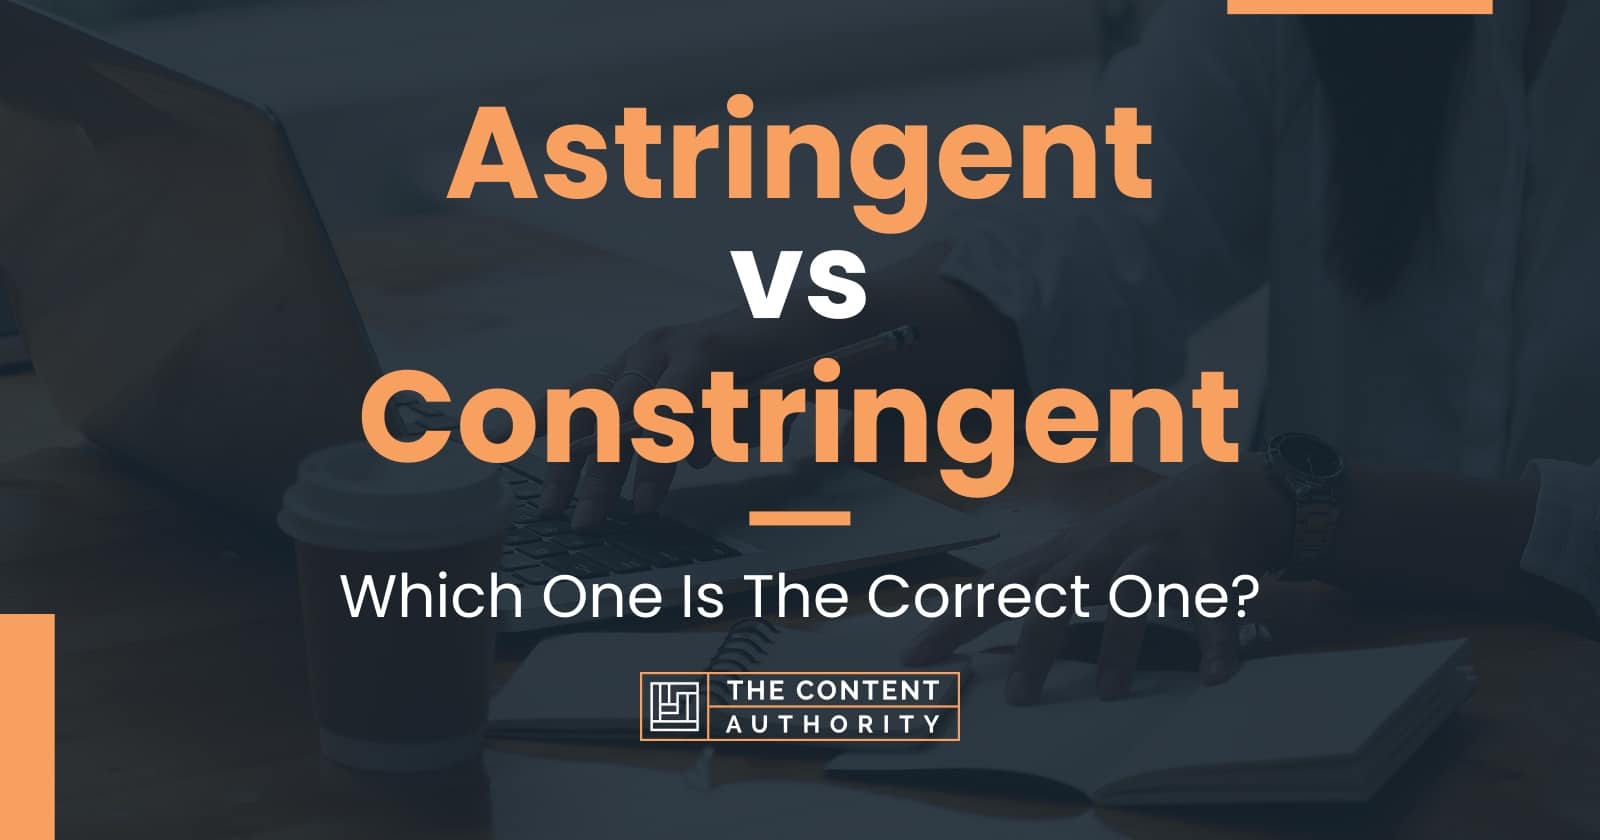 Astringent vs Constringent: Which One Is The Correct One?